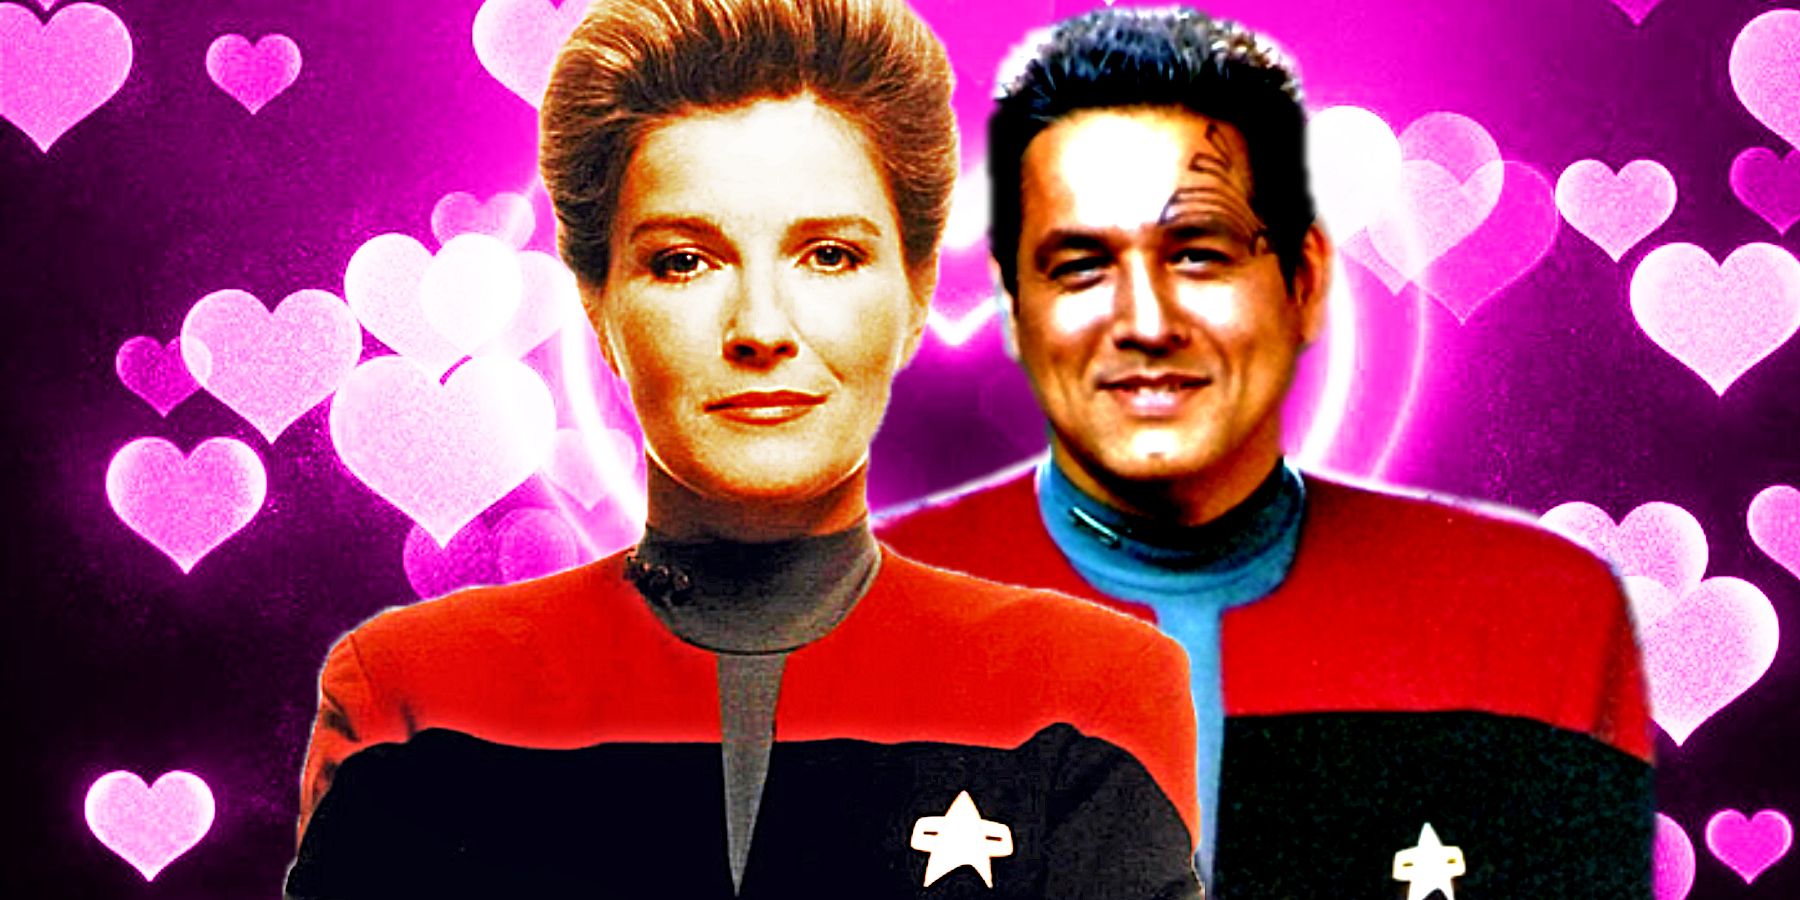 Janeway and Chakotay against a pink background of hearts